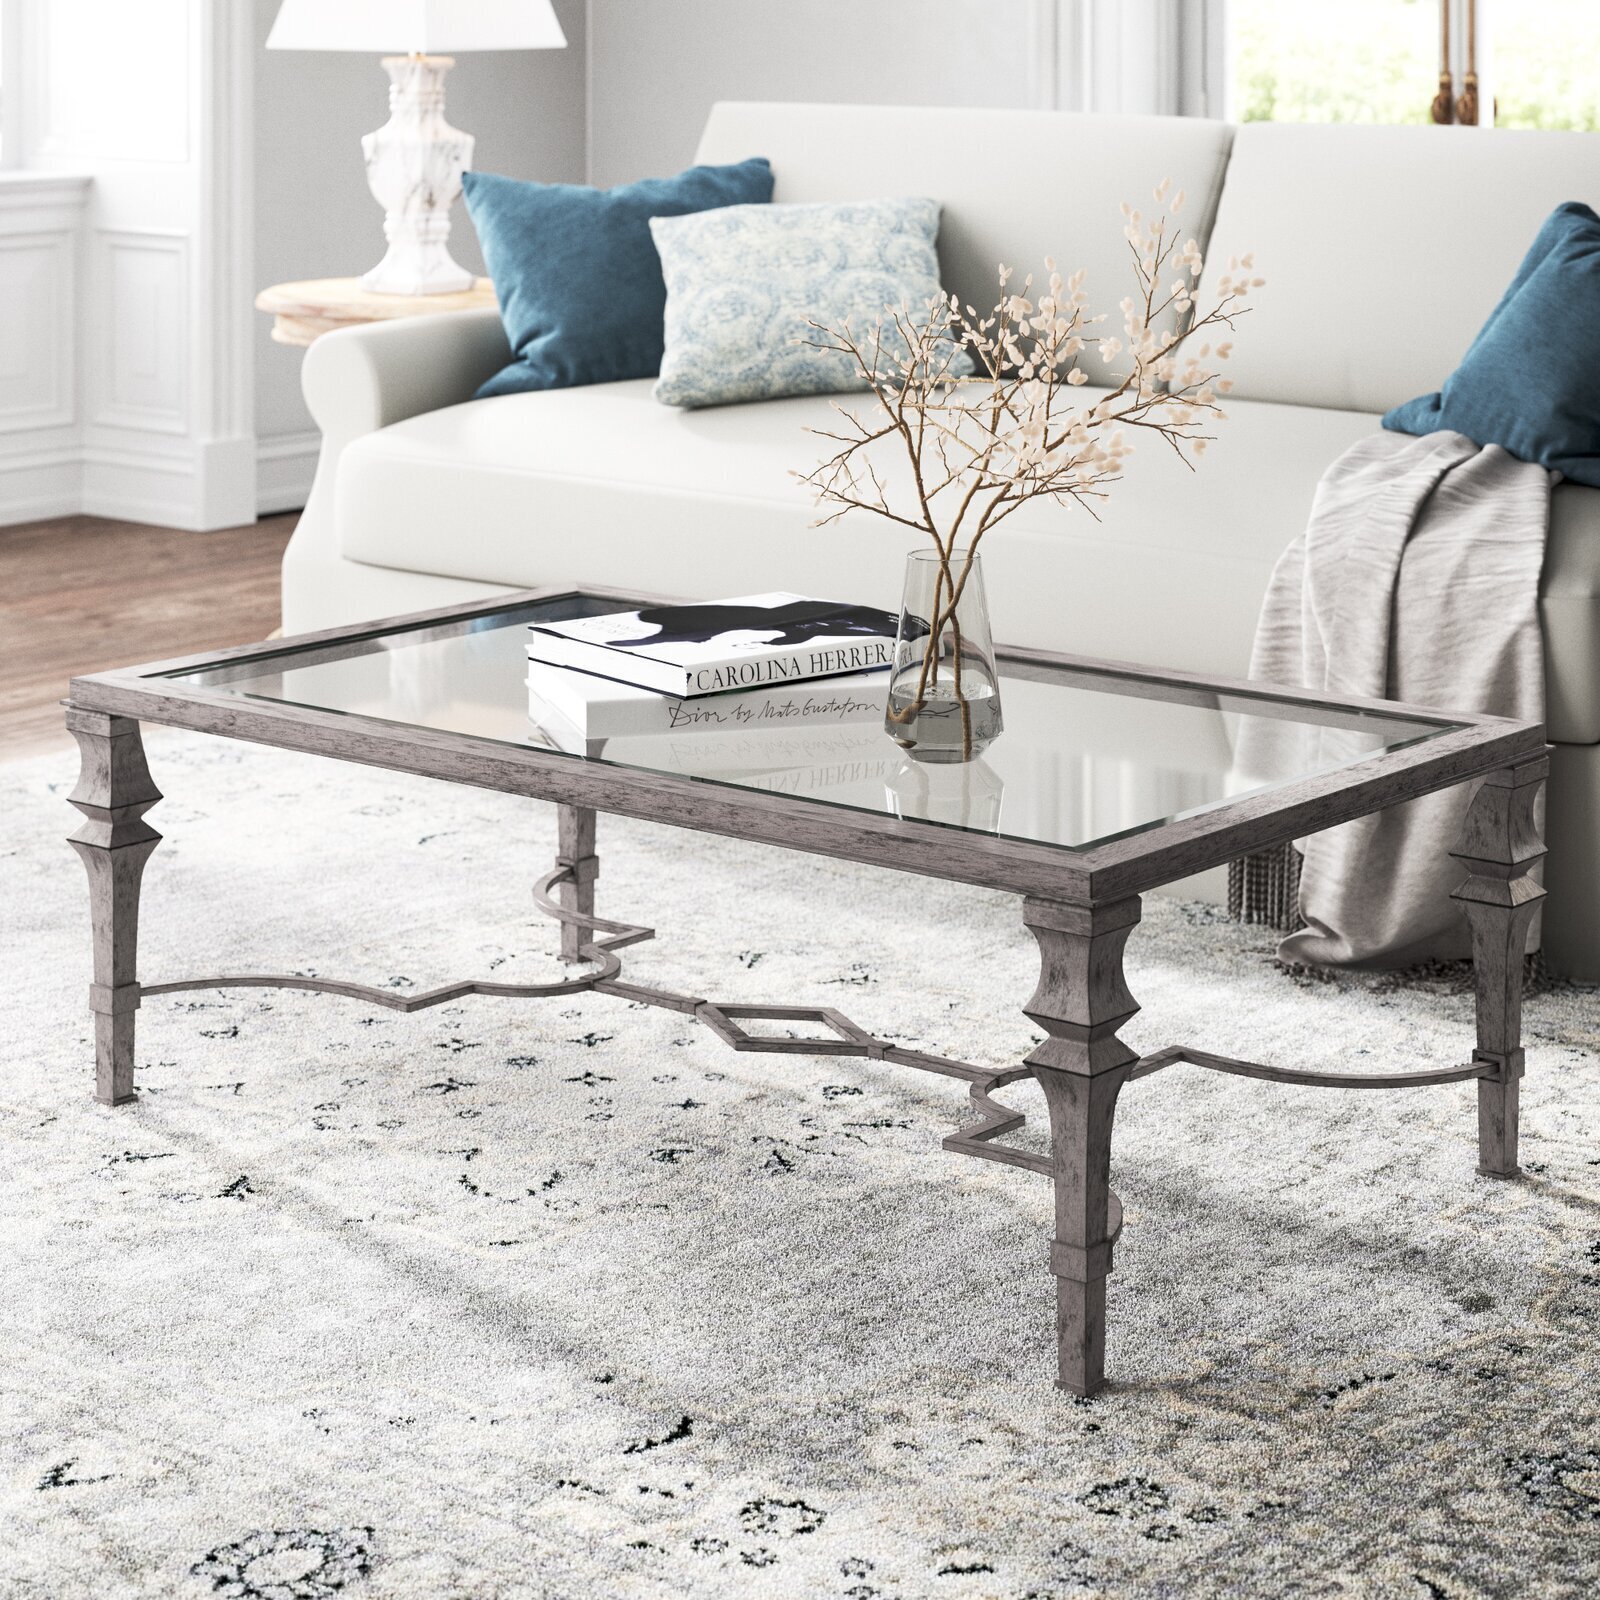 Glass shabby chic coffee table